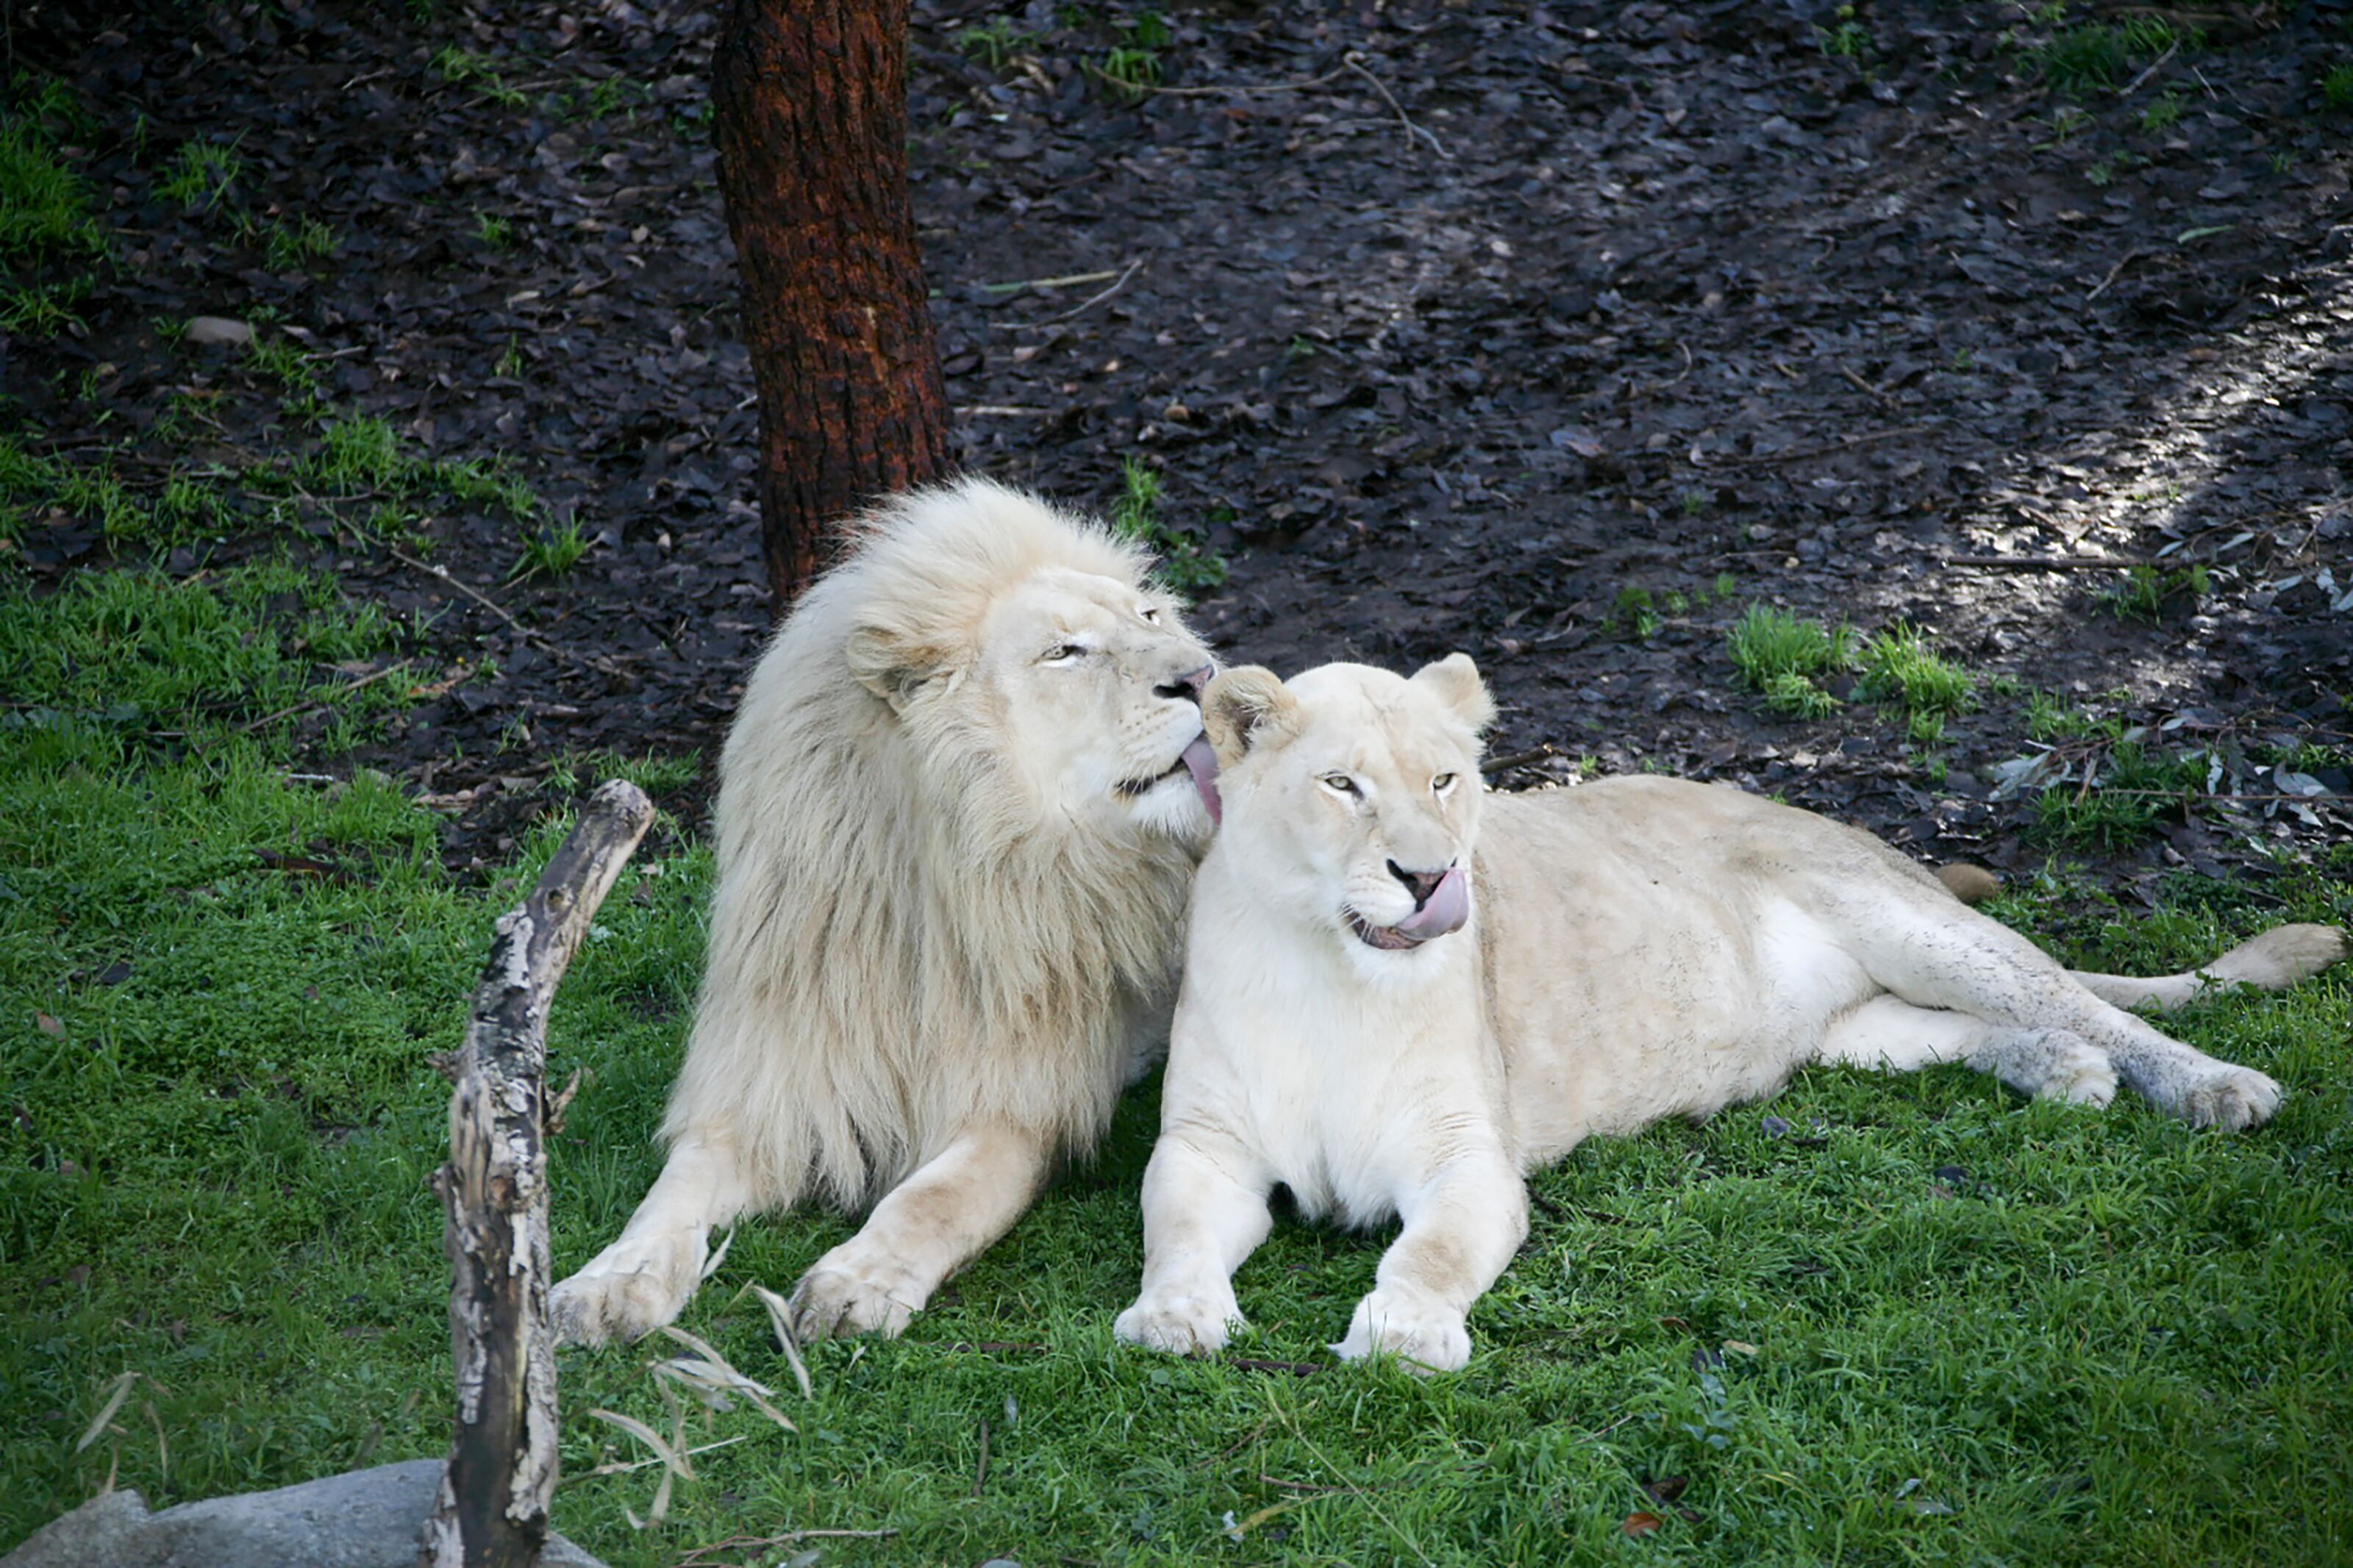 The zoo's white lions, Jake and Mischka, turn 13